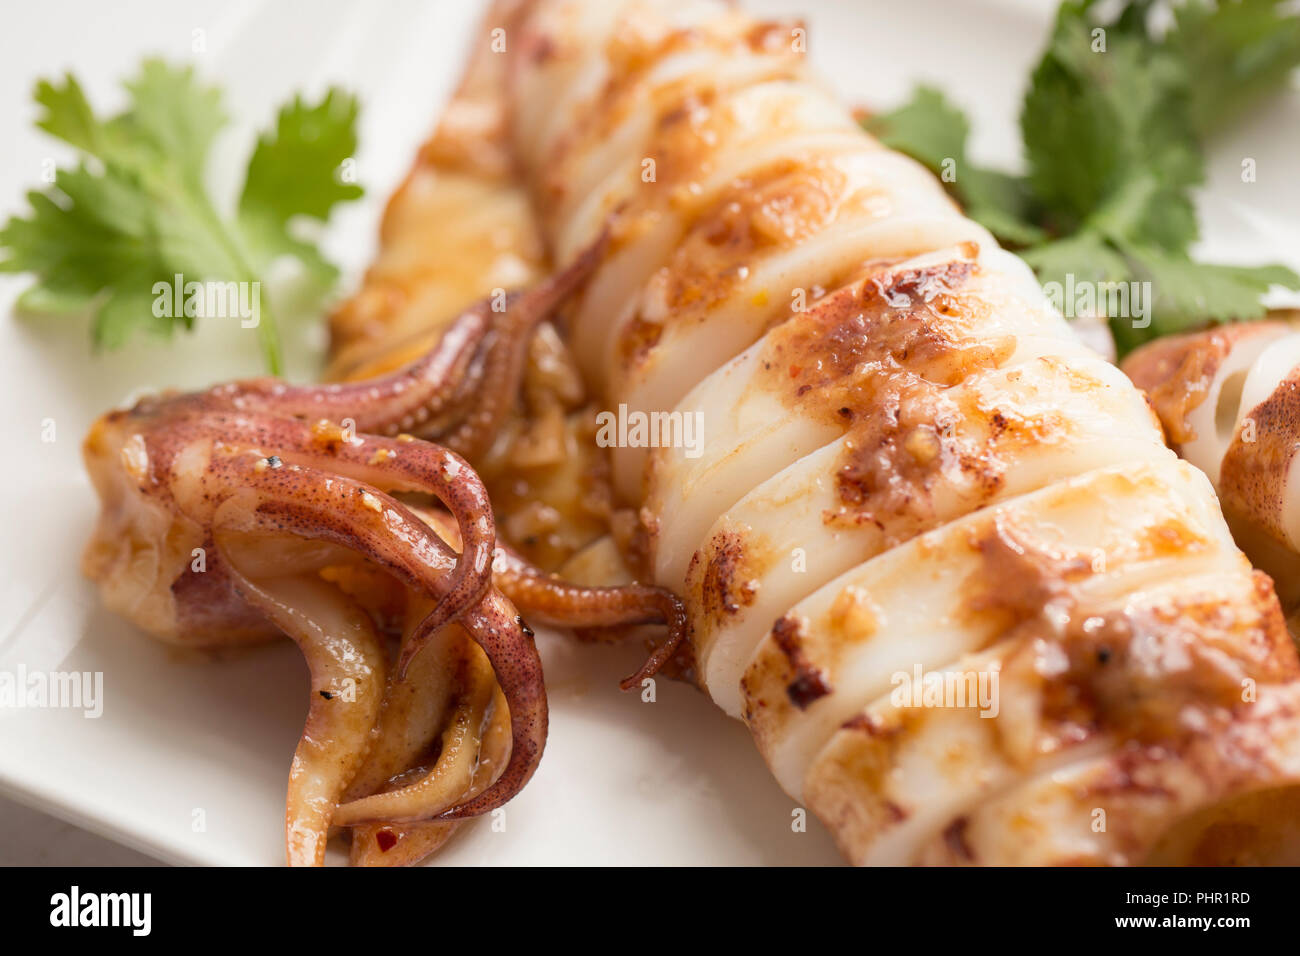 Squid, Loligo vulgaris, caught on rod and line in UK waters that have been fried with butter, vegetable oil, garlic, chili flakes and Teriyaki sauce b Stock Photo